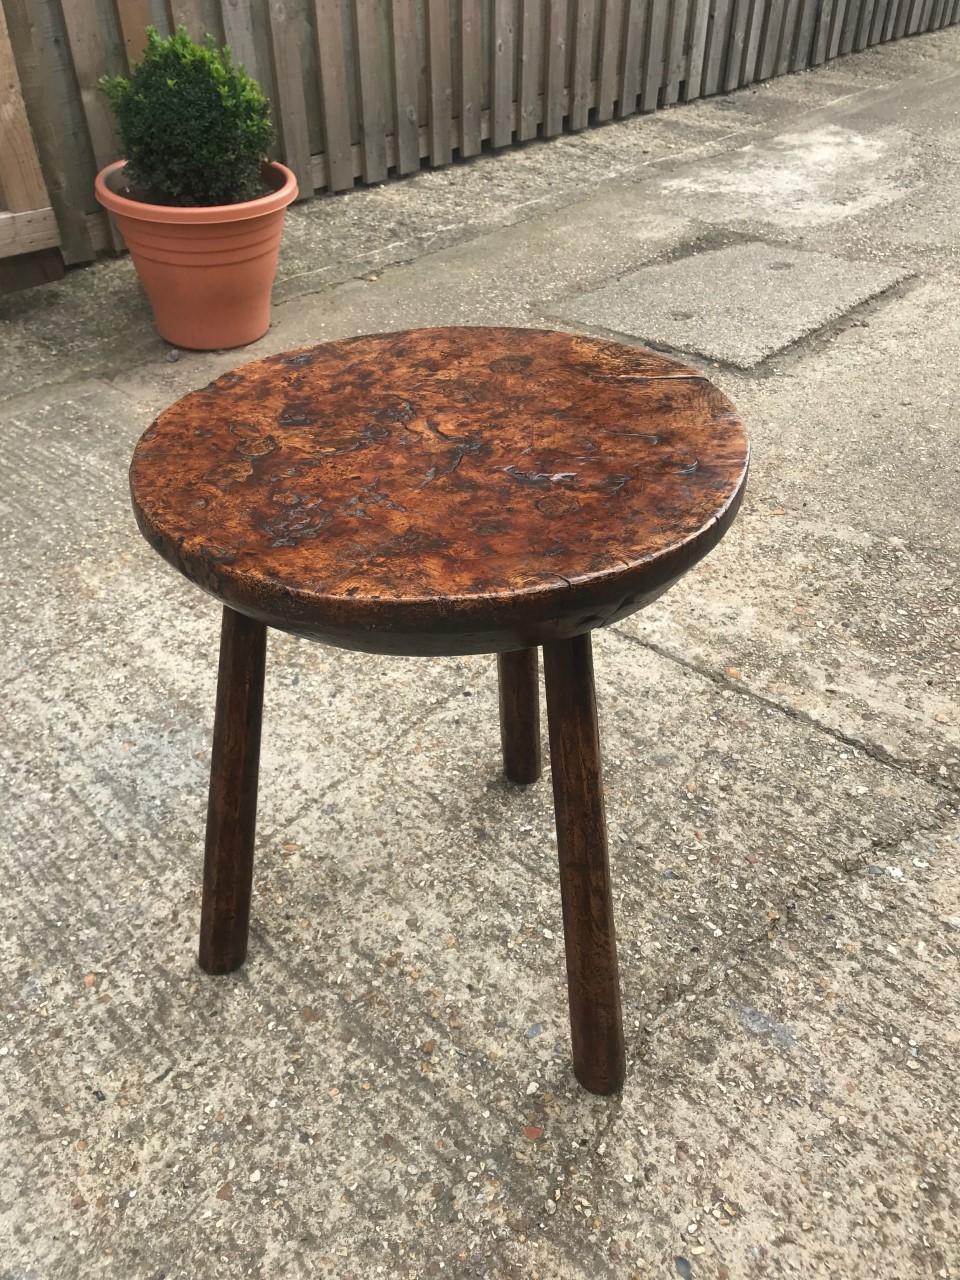 Rare Welsh West country Burr Elm Primitive cheese top cricket table dating from mid 18th century.  Glorious highly figured burr elm 2 3/4